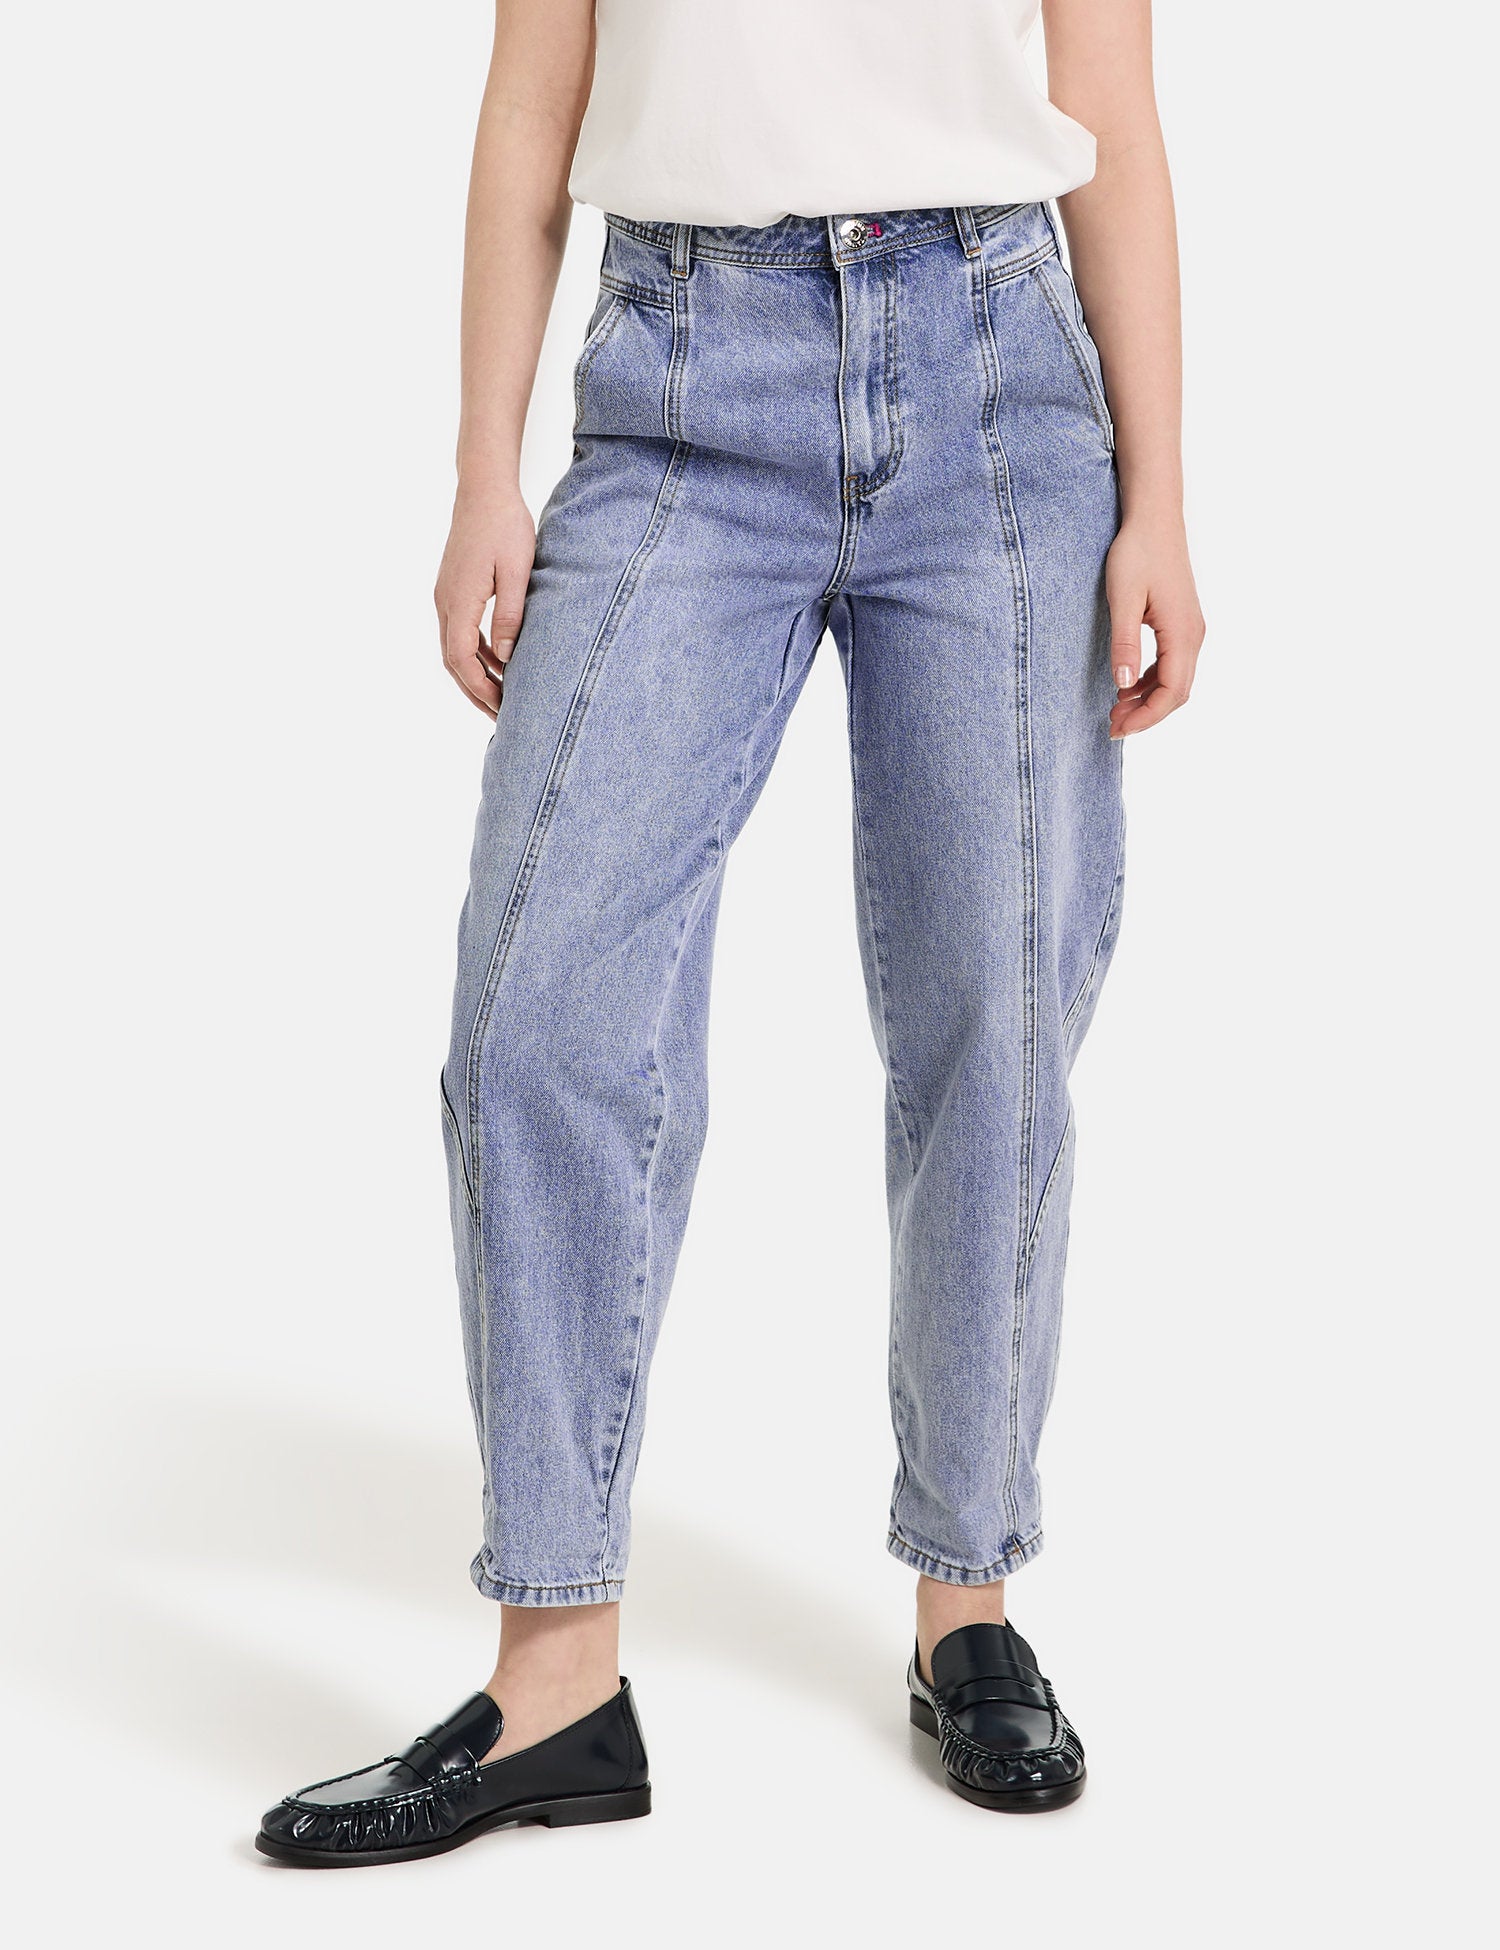 3/4-Length Jeans In A Balloon Fit_520328-11413_8969_04